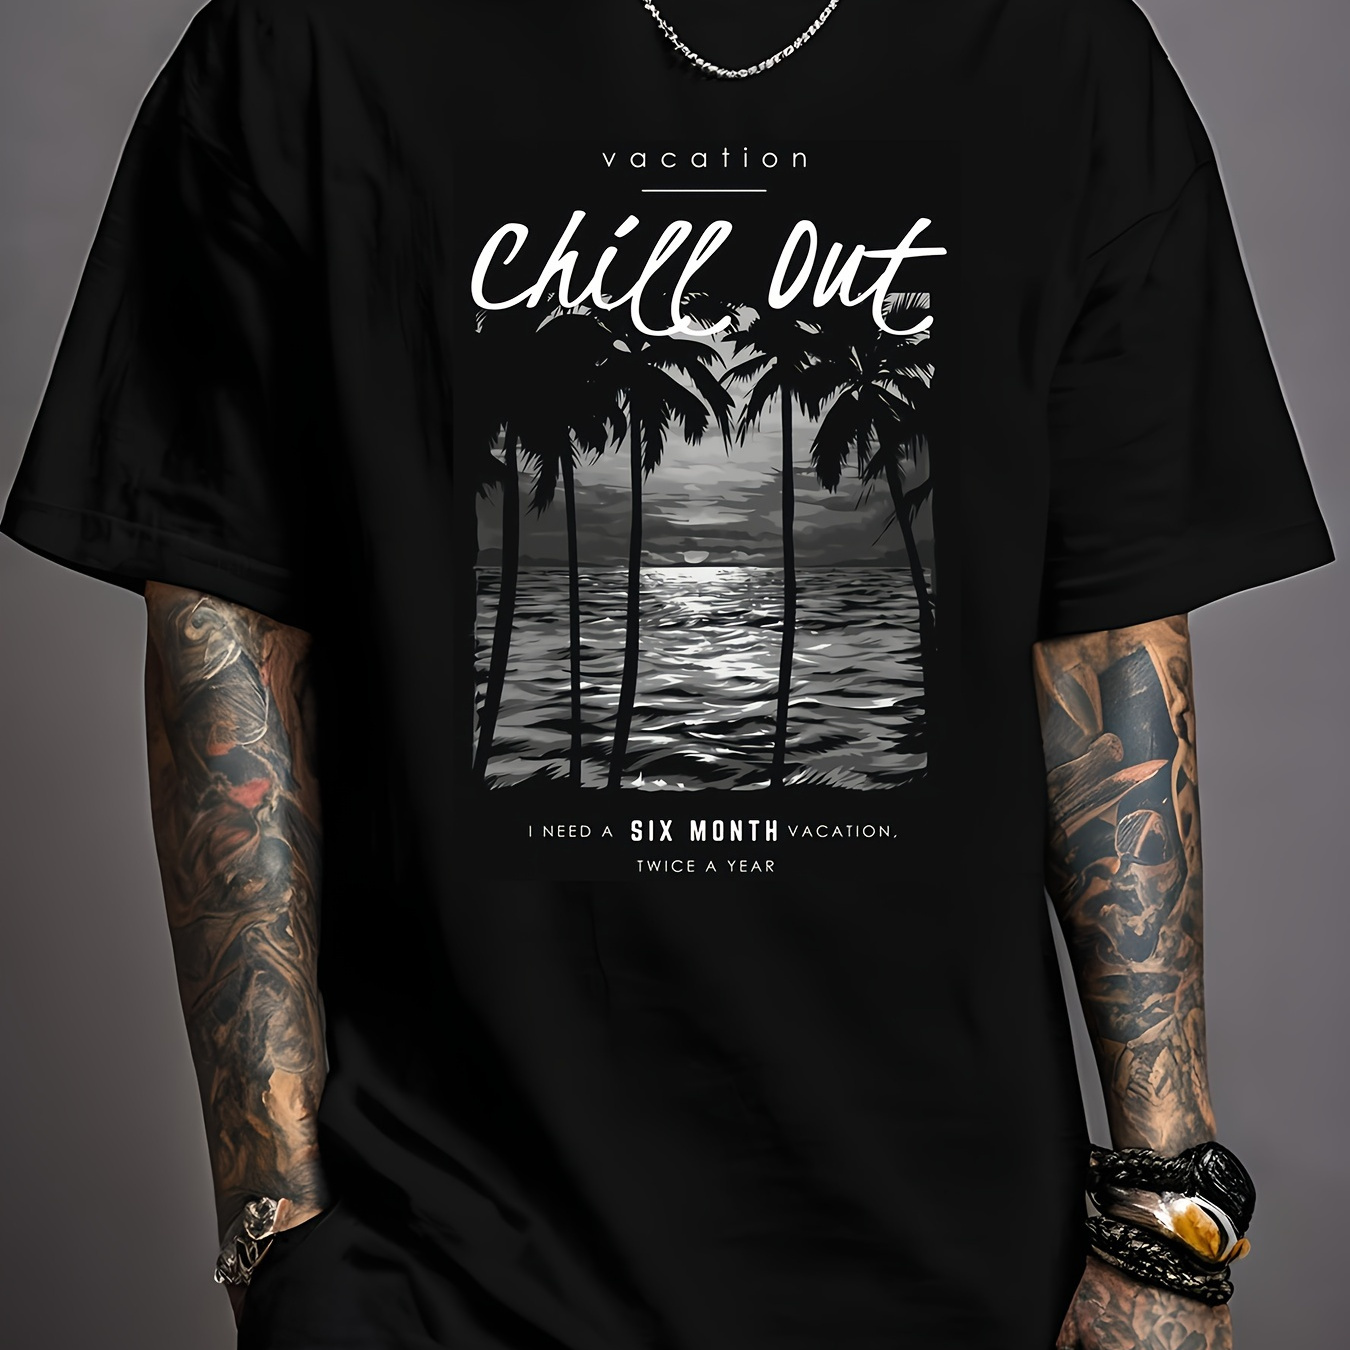 

Palm Tree Creative Print T-shirt, 220g High Quality Cotton Short Sleeve Shirt - Breathable, Comfortable, Slightly Stretchy, Casual And Fashionable Summer Tops For Men